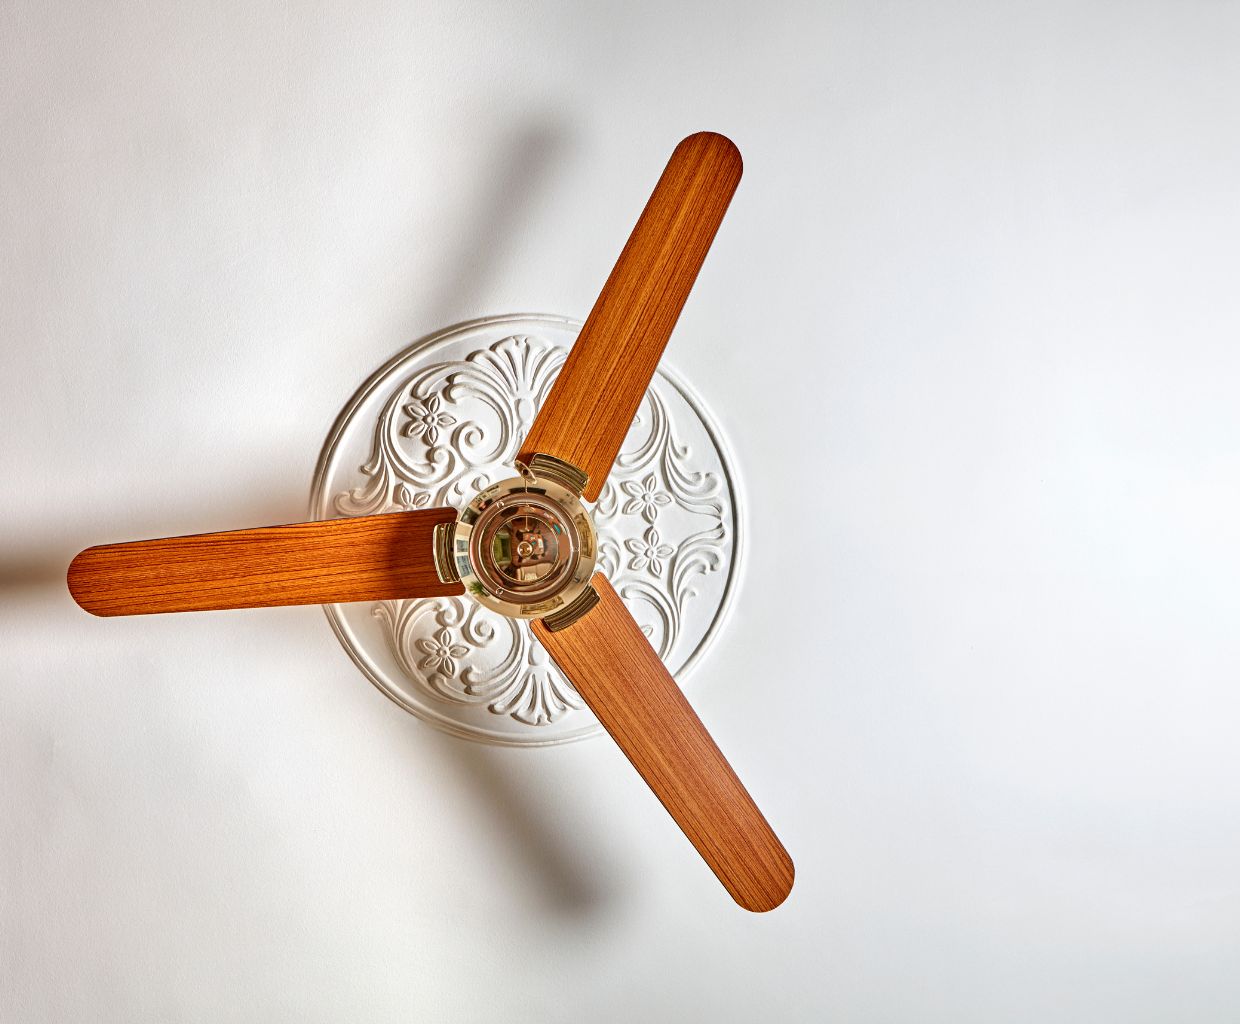 Six Wooden Ceiling Fan Designs That Will Wow You